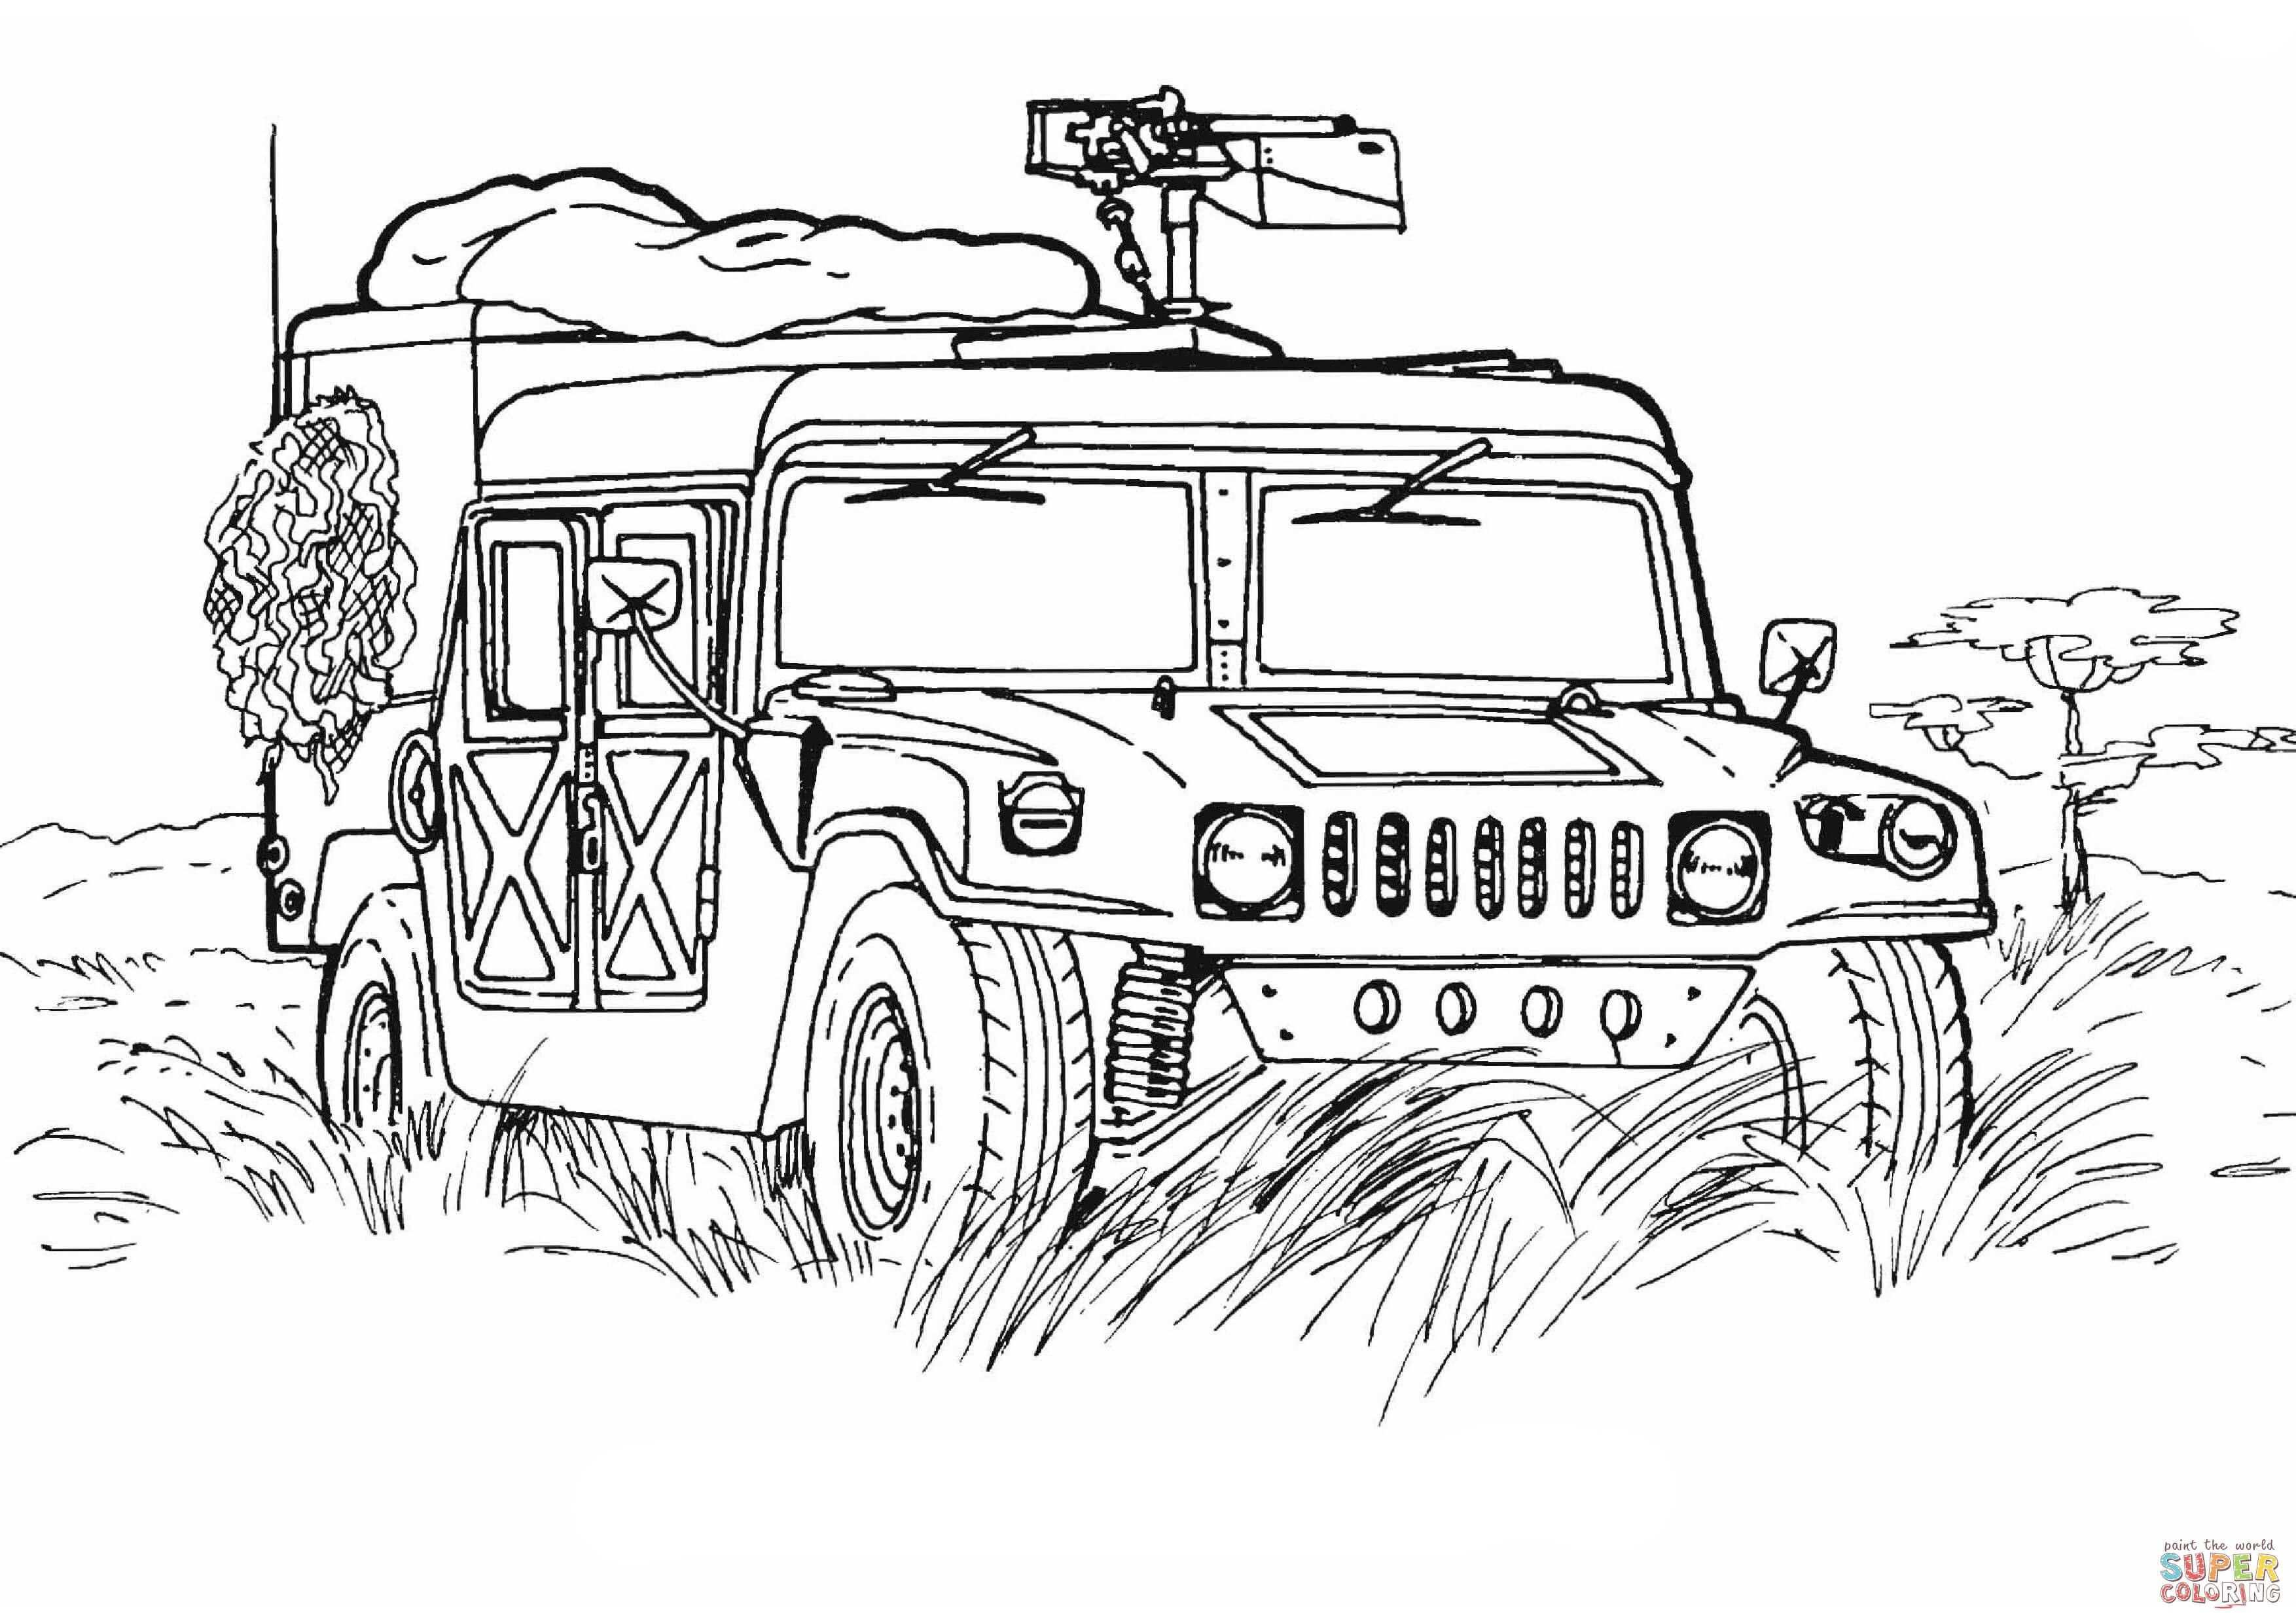 Awesome Coloring Pages Army That You Must Know You Re In Good